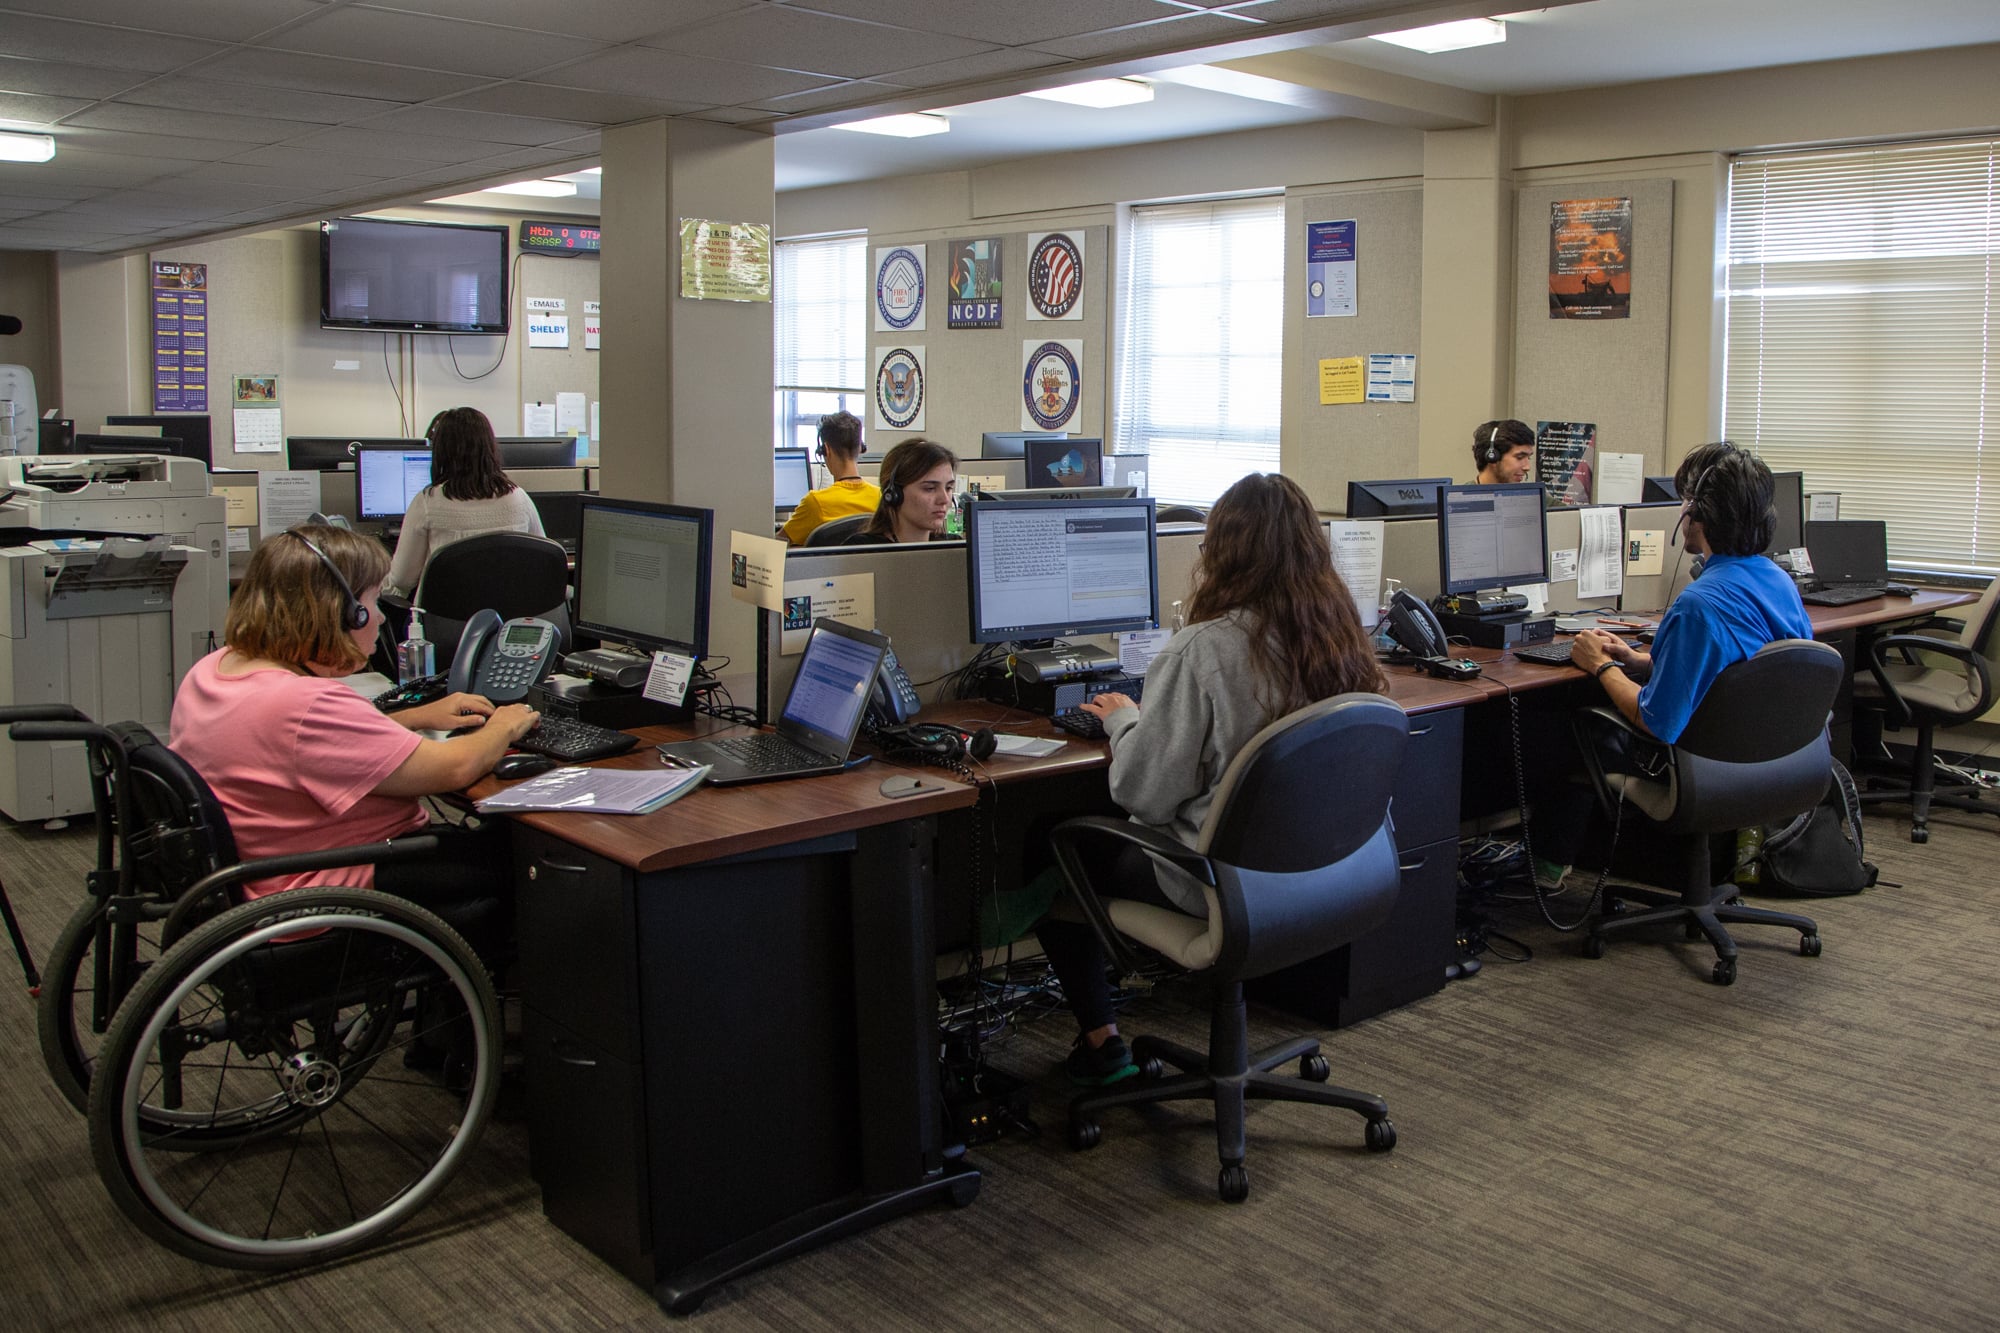 Students process disaster fraud complaints at the National Center for Disaster Fraud, which is headquartered in Baton Rouge, Louisiana. Losses to disaster fraud are estimated at 10% of disaster-related insurance payouts and FEMA spending. (Natalie Anderson/News21)